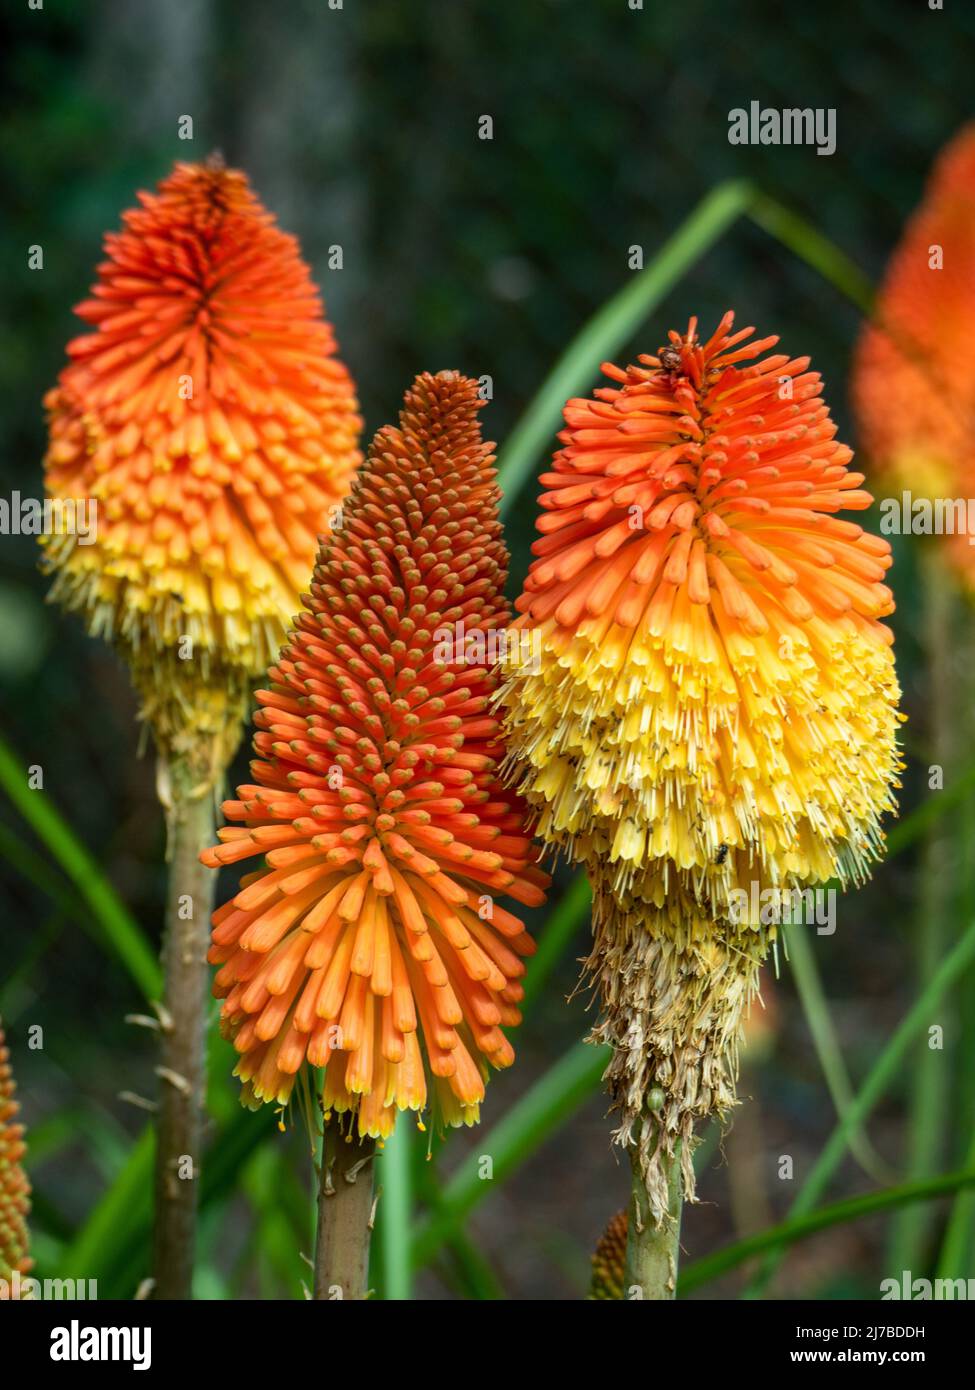 Flowers, Kniphofia, Red Hot Poker plant, Three bright and vividly coloured orange and yellow Flower spires, Australian Coastal Garden, Torch Lily Stock Photo